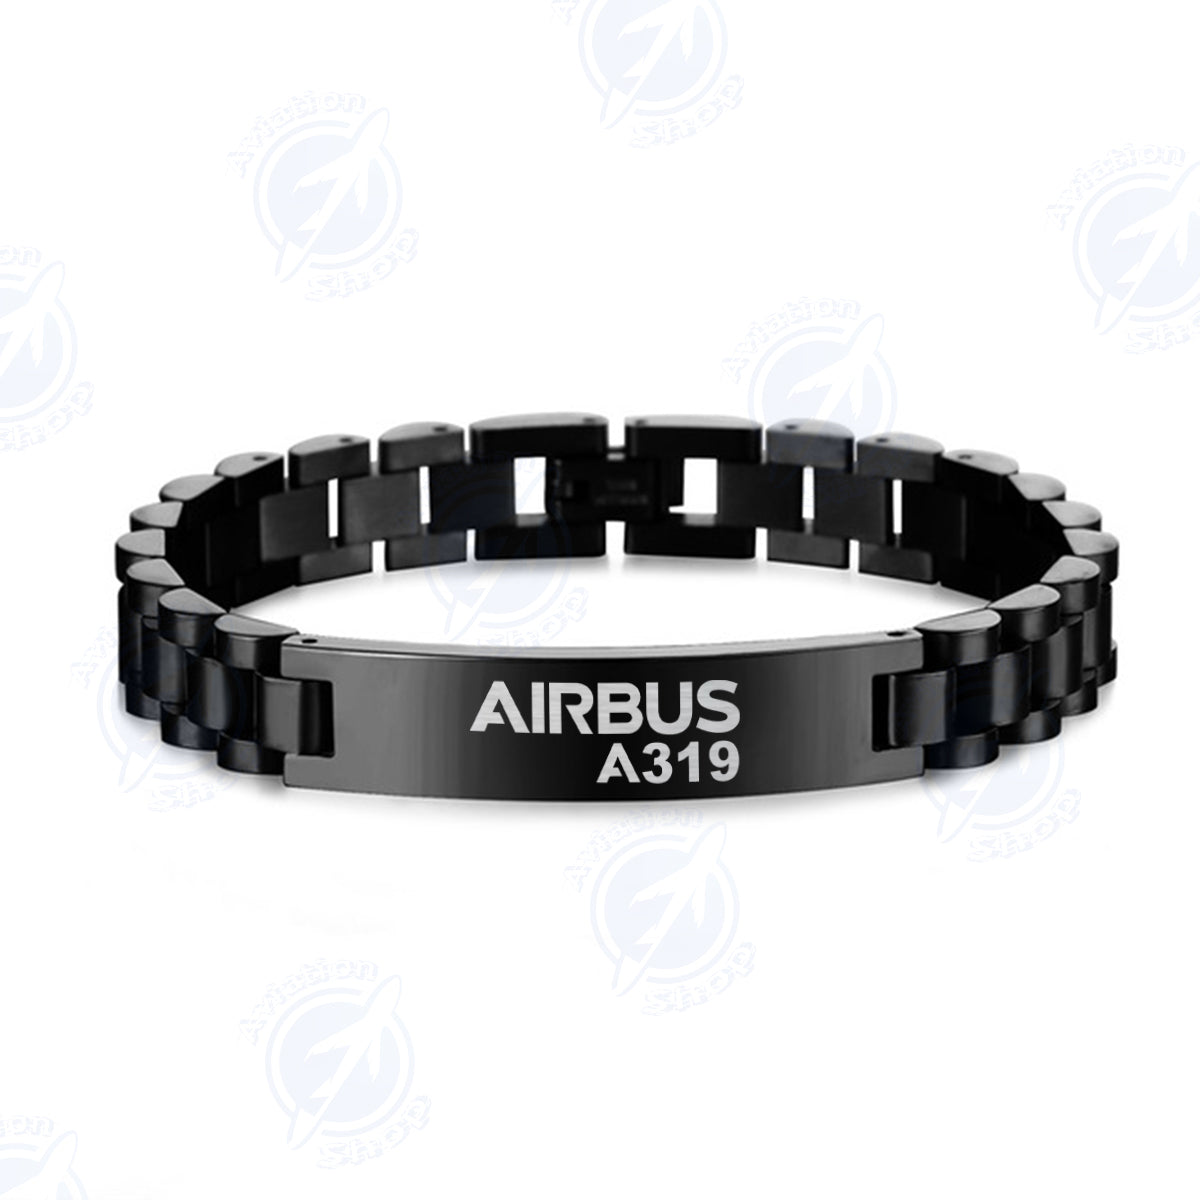 Airbus A319 & Text Designed Stainless Steel Chain Bracelets